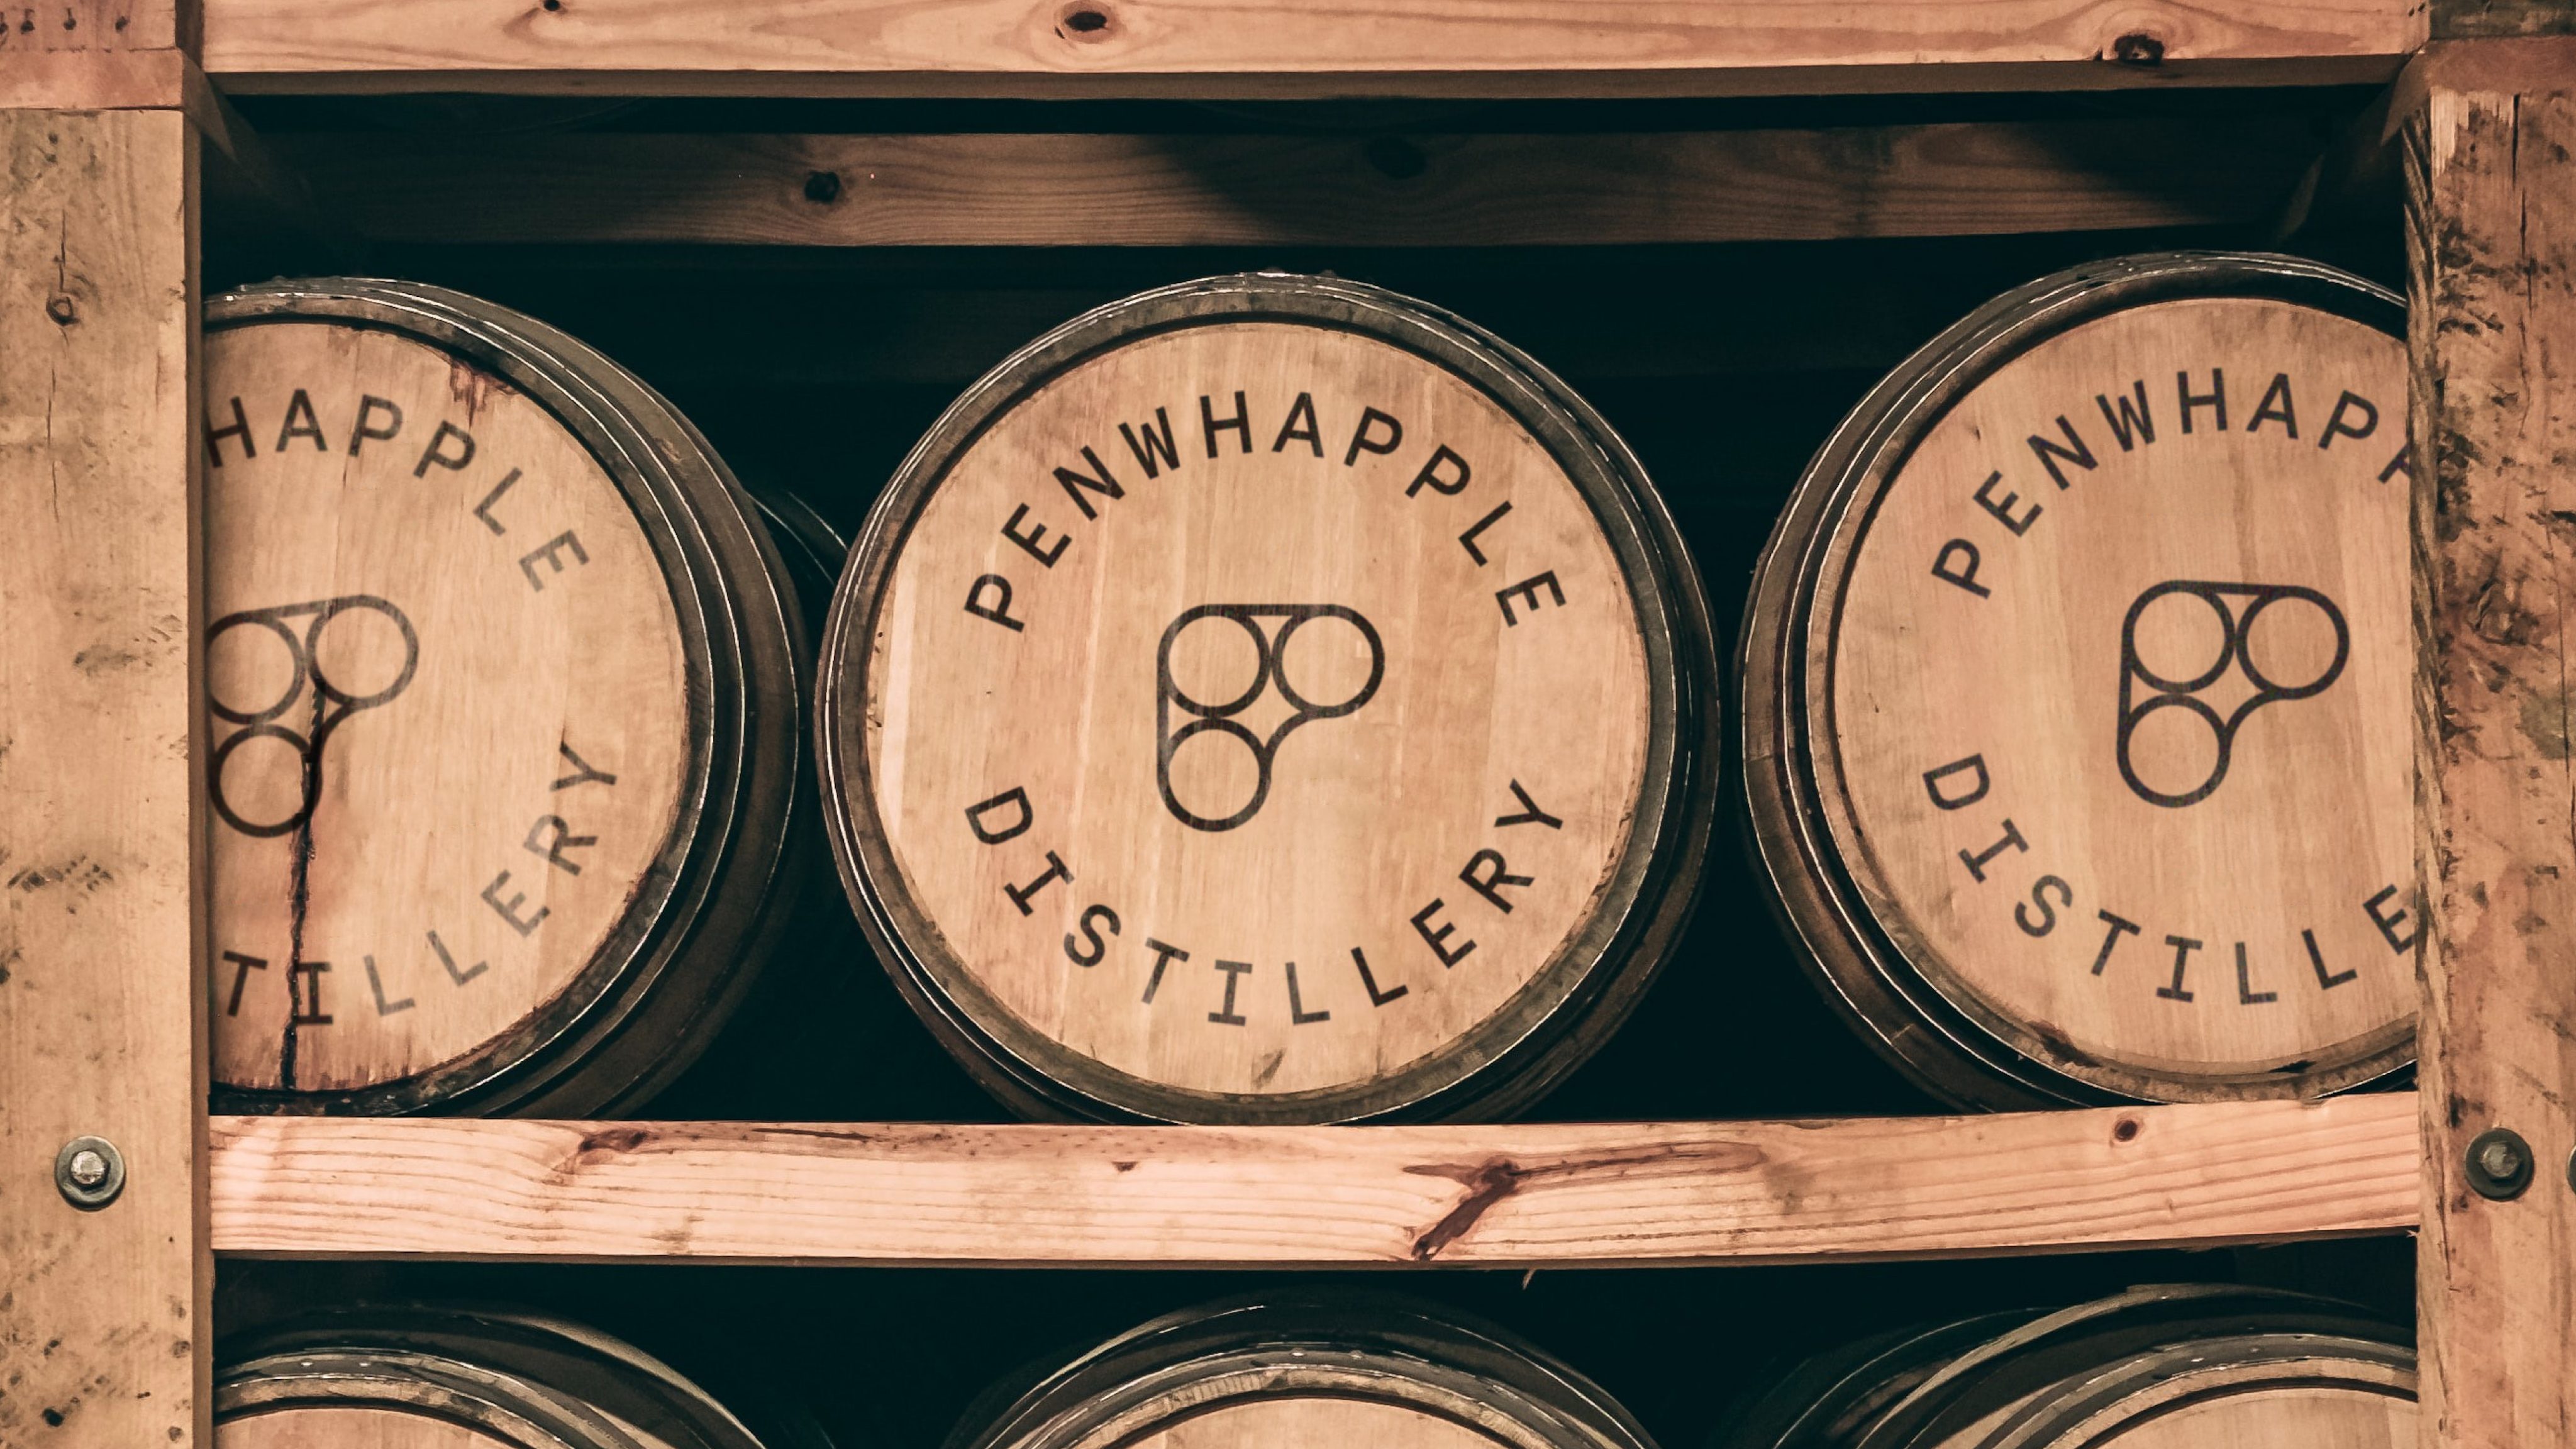 Wooden barrels with the distillery logo on them